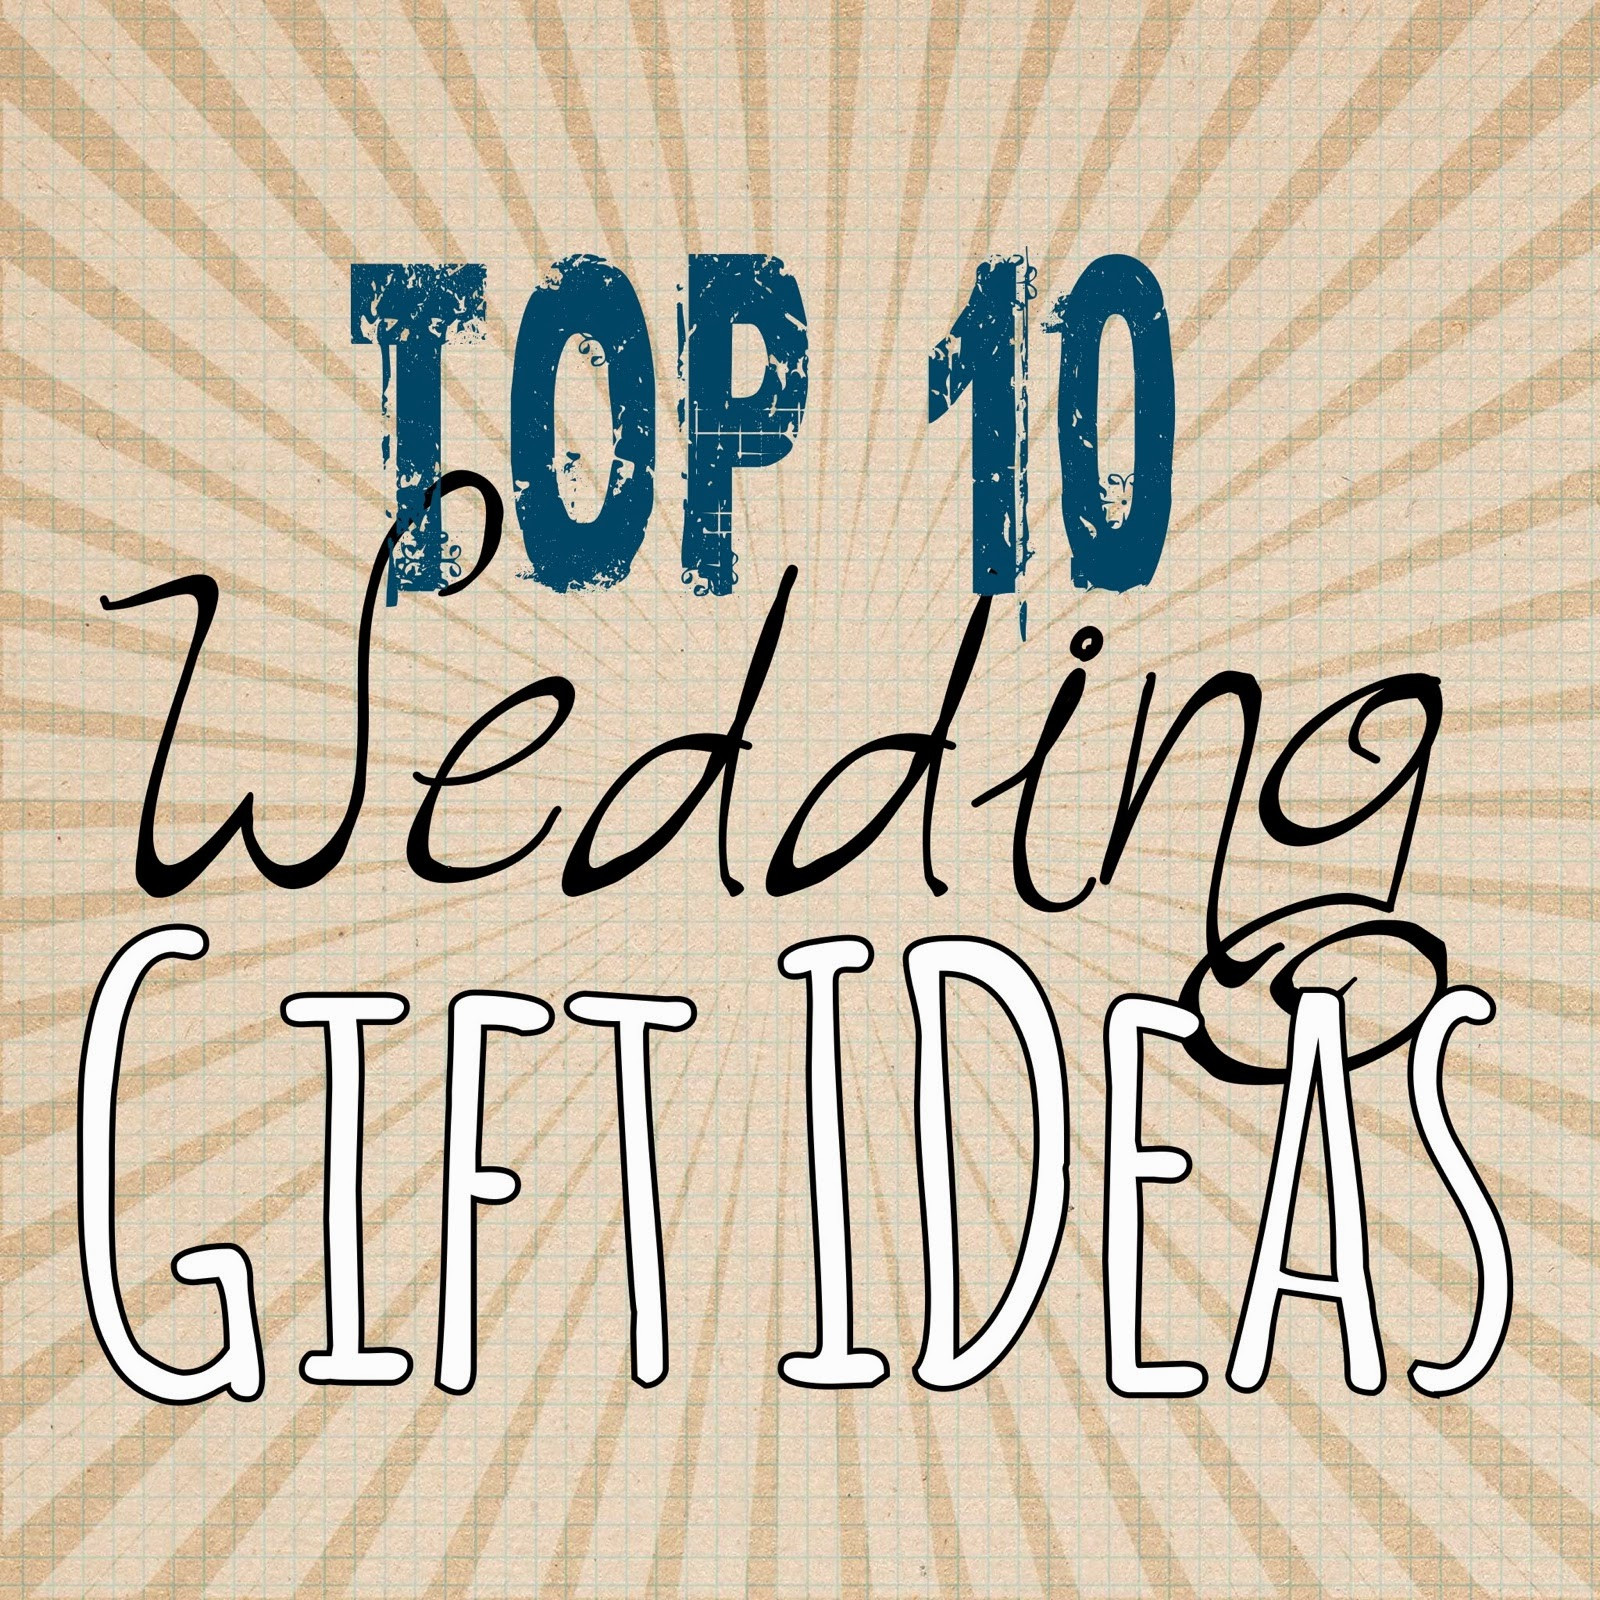 Best Wedding Gifts For Couples
 Top 10 Wedding Gift Ideas Lou Lou Girls